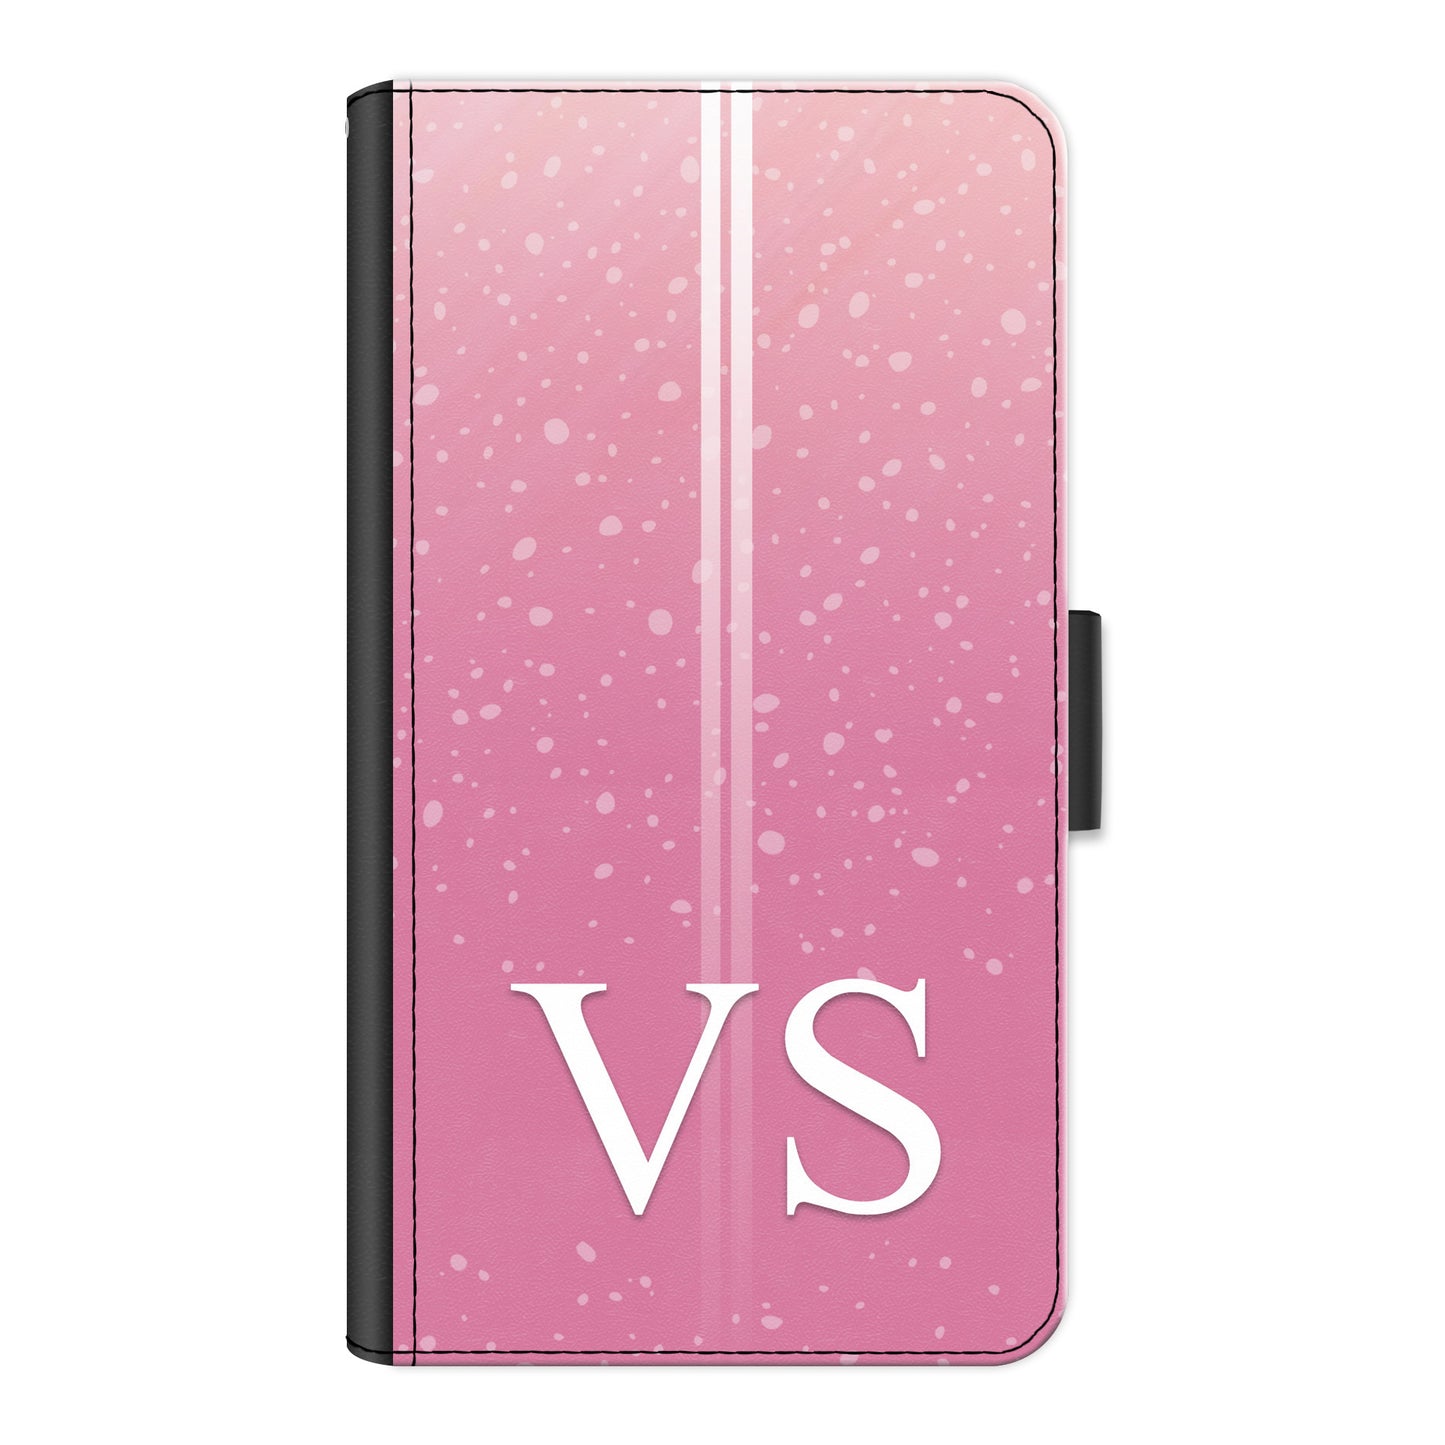 Personalised Nokia Phone Leather Wallet with White Initials, Pin Stripes and Droplets on Pink